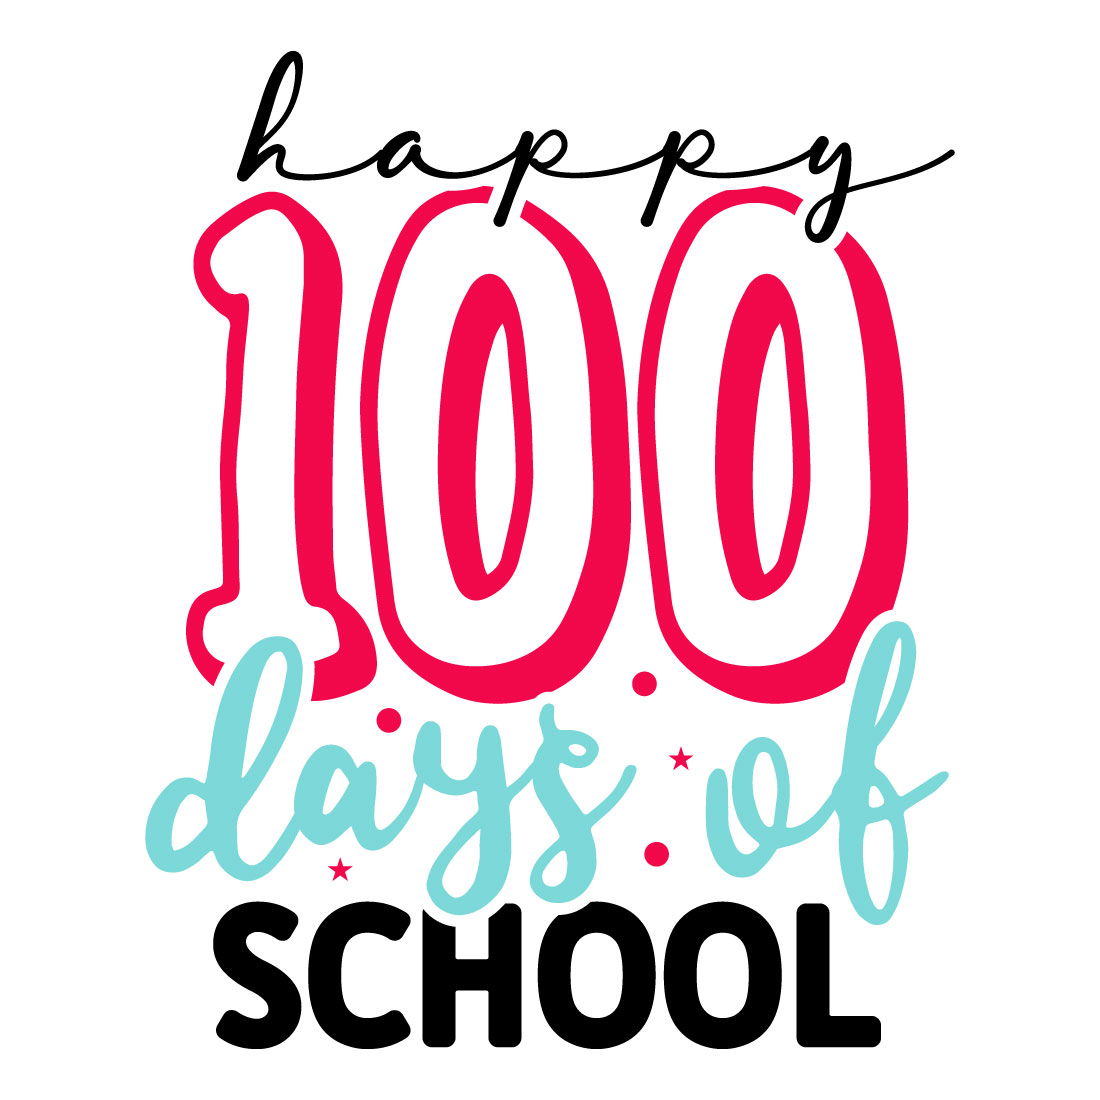 Image for prints with enchanting inscription Happy 100 Days Of School